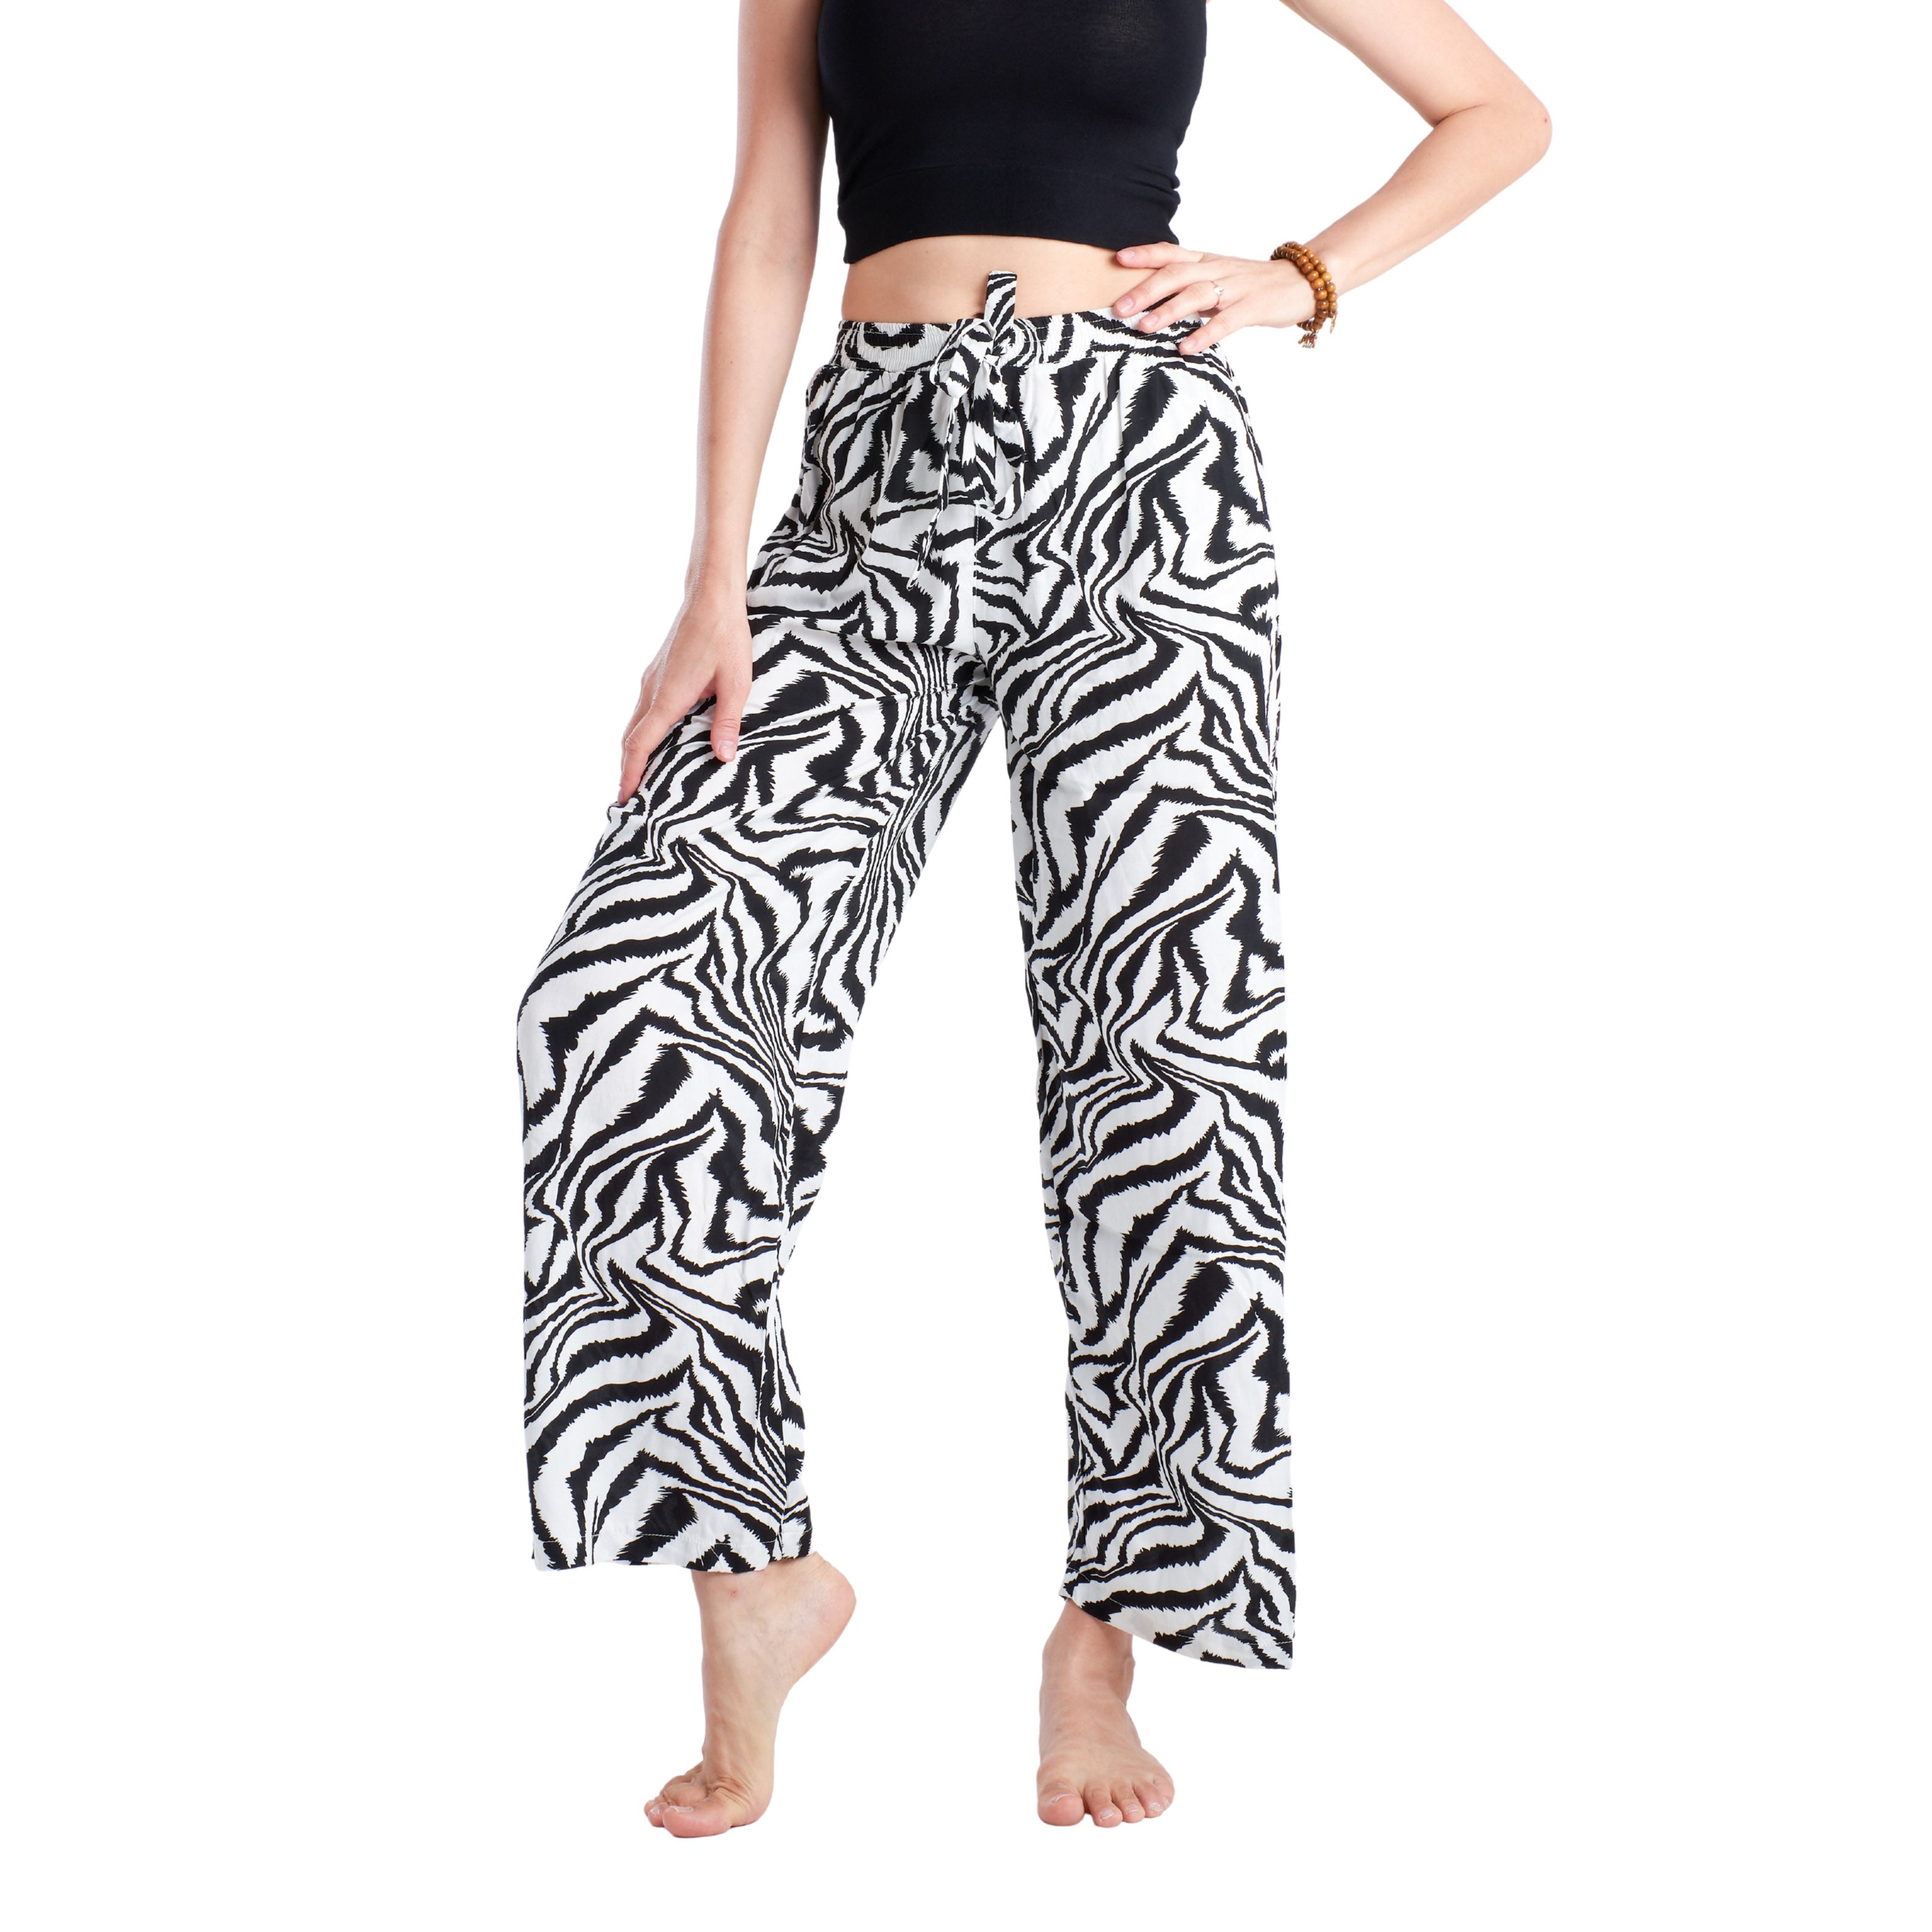 ZEN PANTS Elepanta Casual Pants - Buy Today Elephant Pants Jewelry And Bohemian Clothes Handmade In Thailand Help To Save The Elephants FairTrade And Vegan